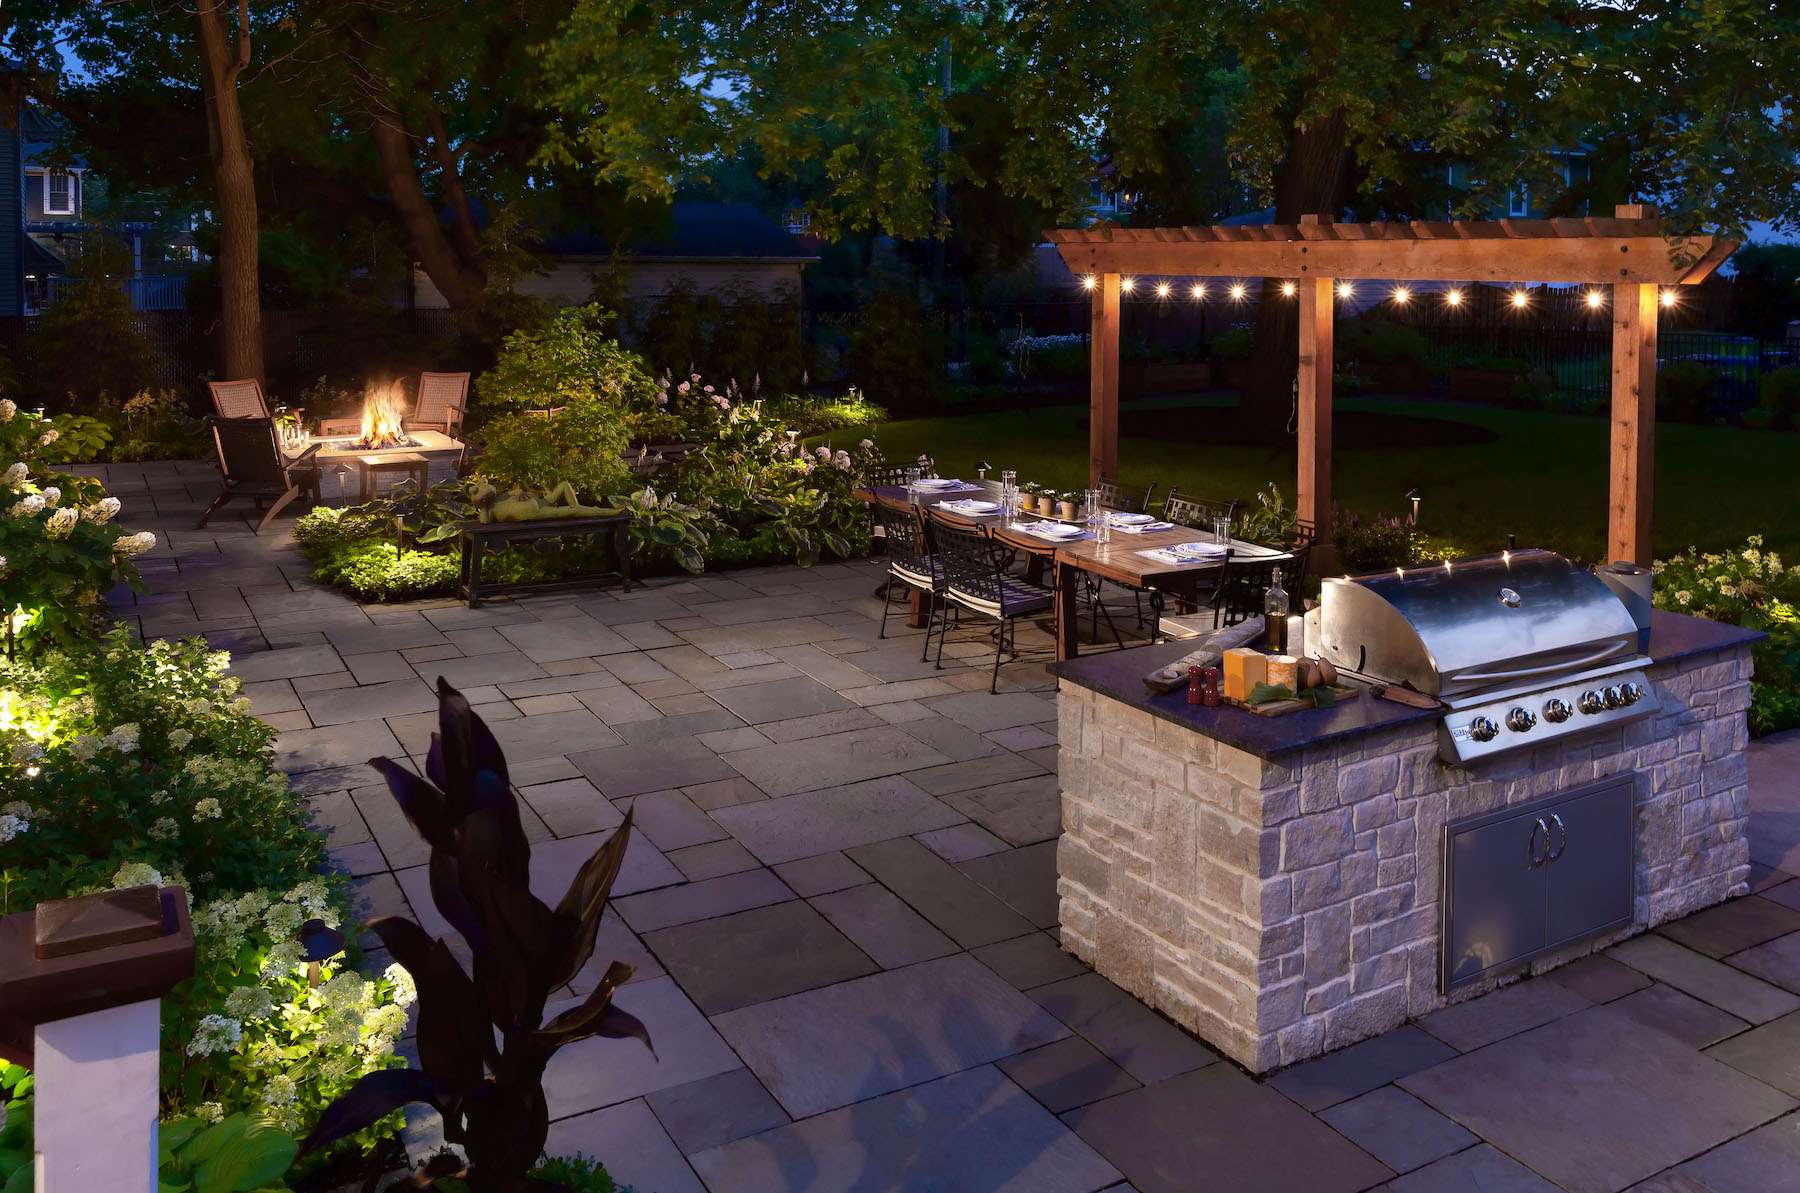 landscape lighting in flower beds and on pergola with outdoor kitchen firepit and patio